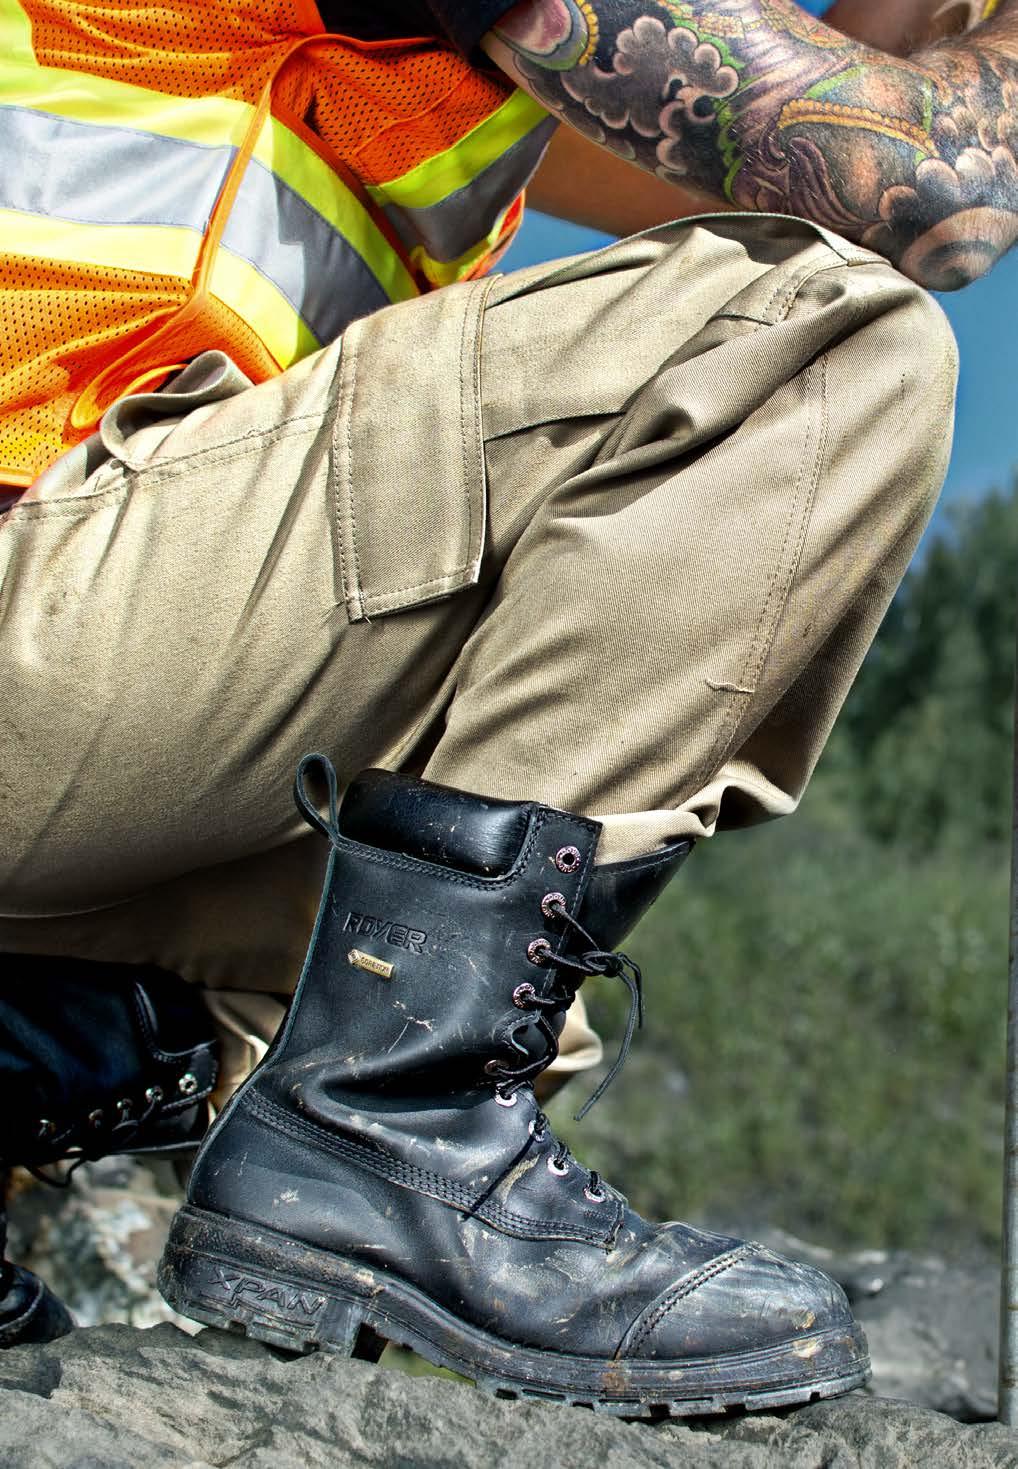 MINING INDUSTRY ROYER boots who are equipped with GORE-TEX technology keep your feet dry.